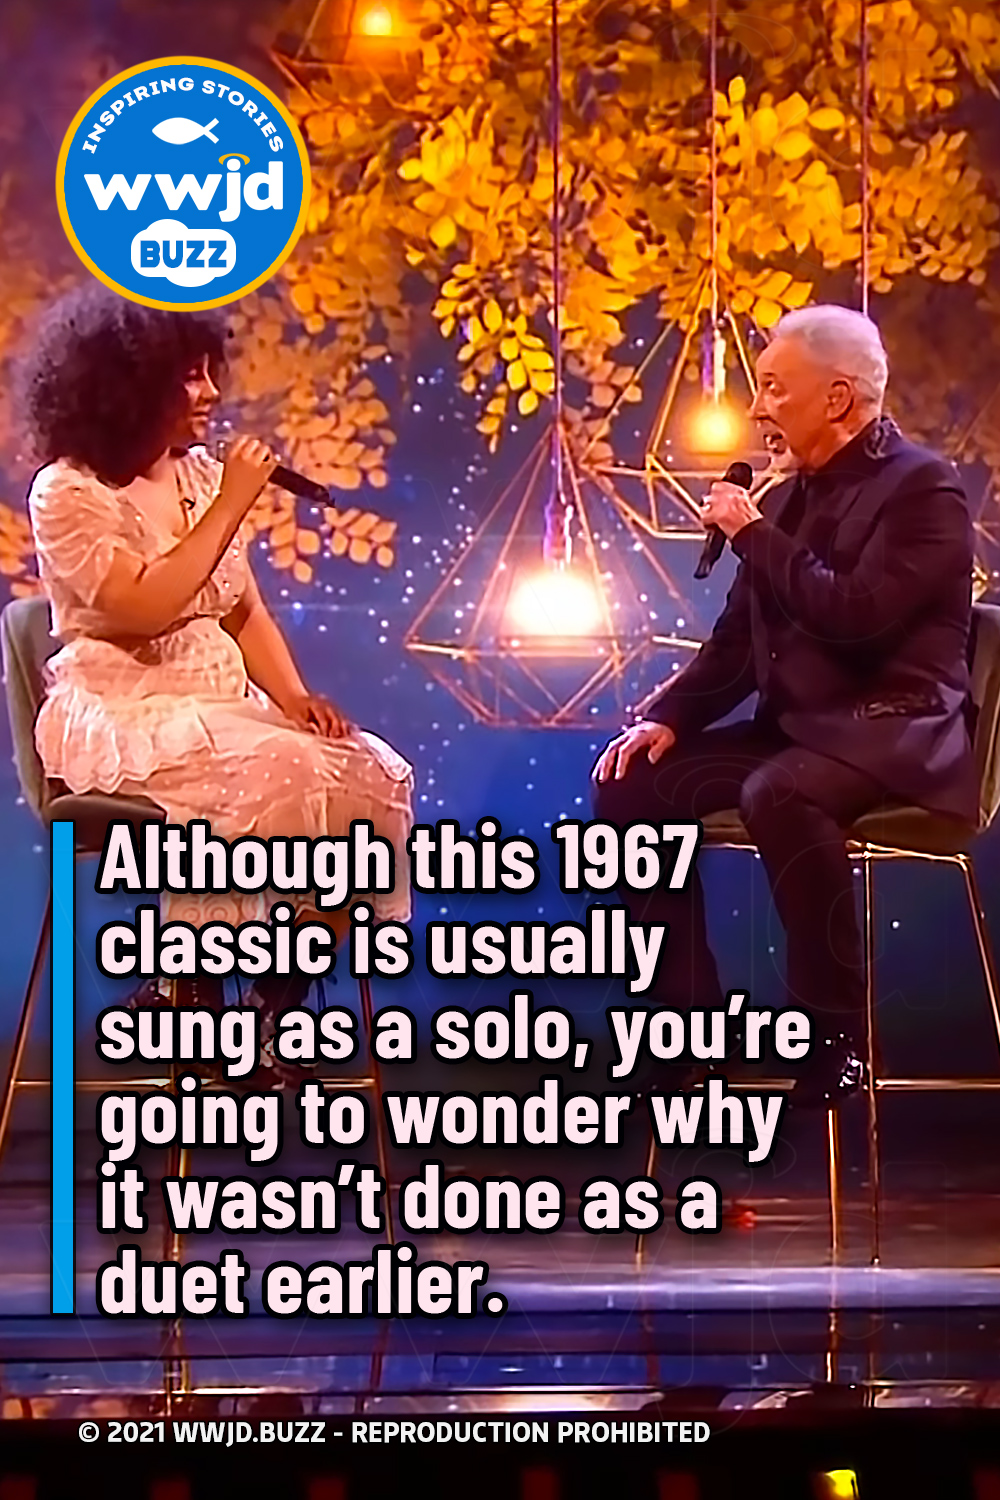 Although this 1967 classic is usually sung as a solo, you’re going to wonder why it wasn’t done as a duet earlier.